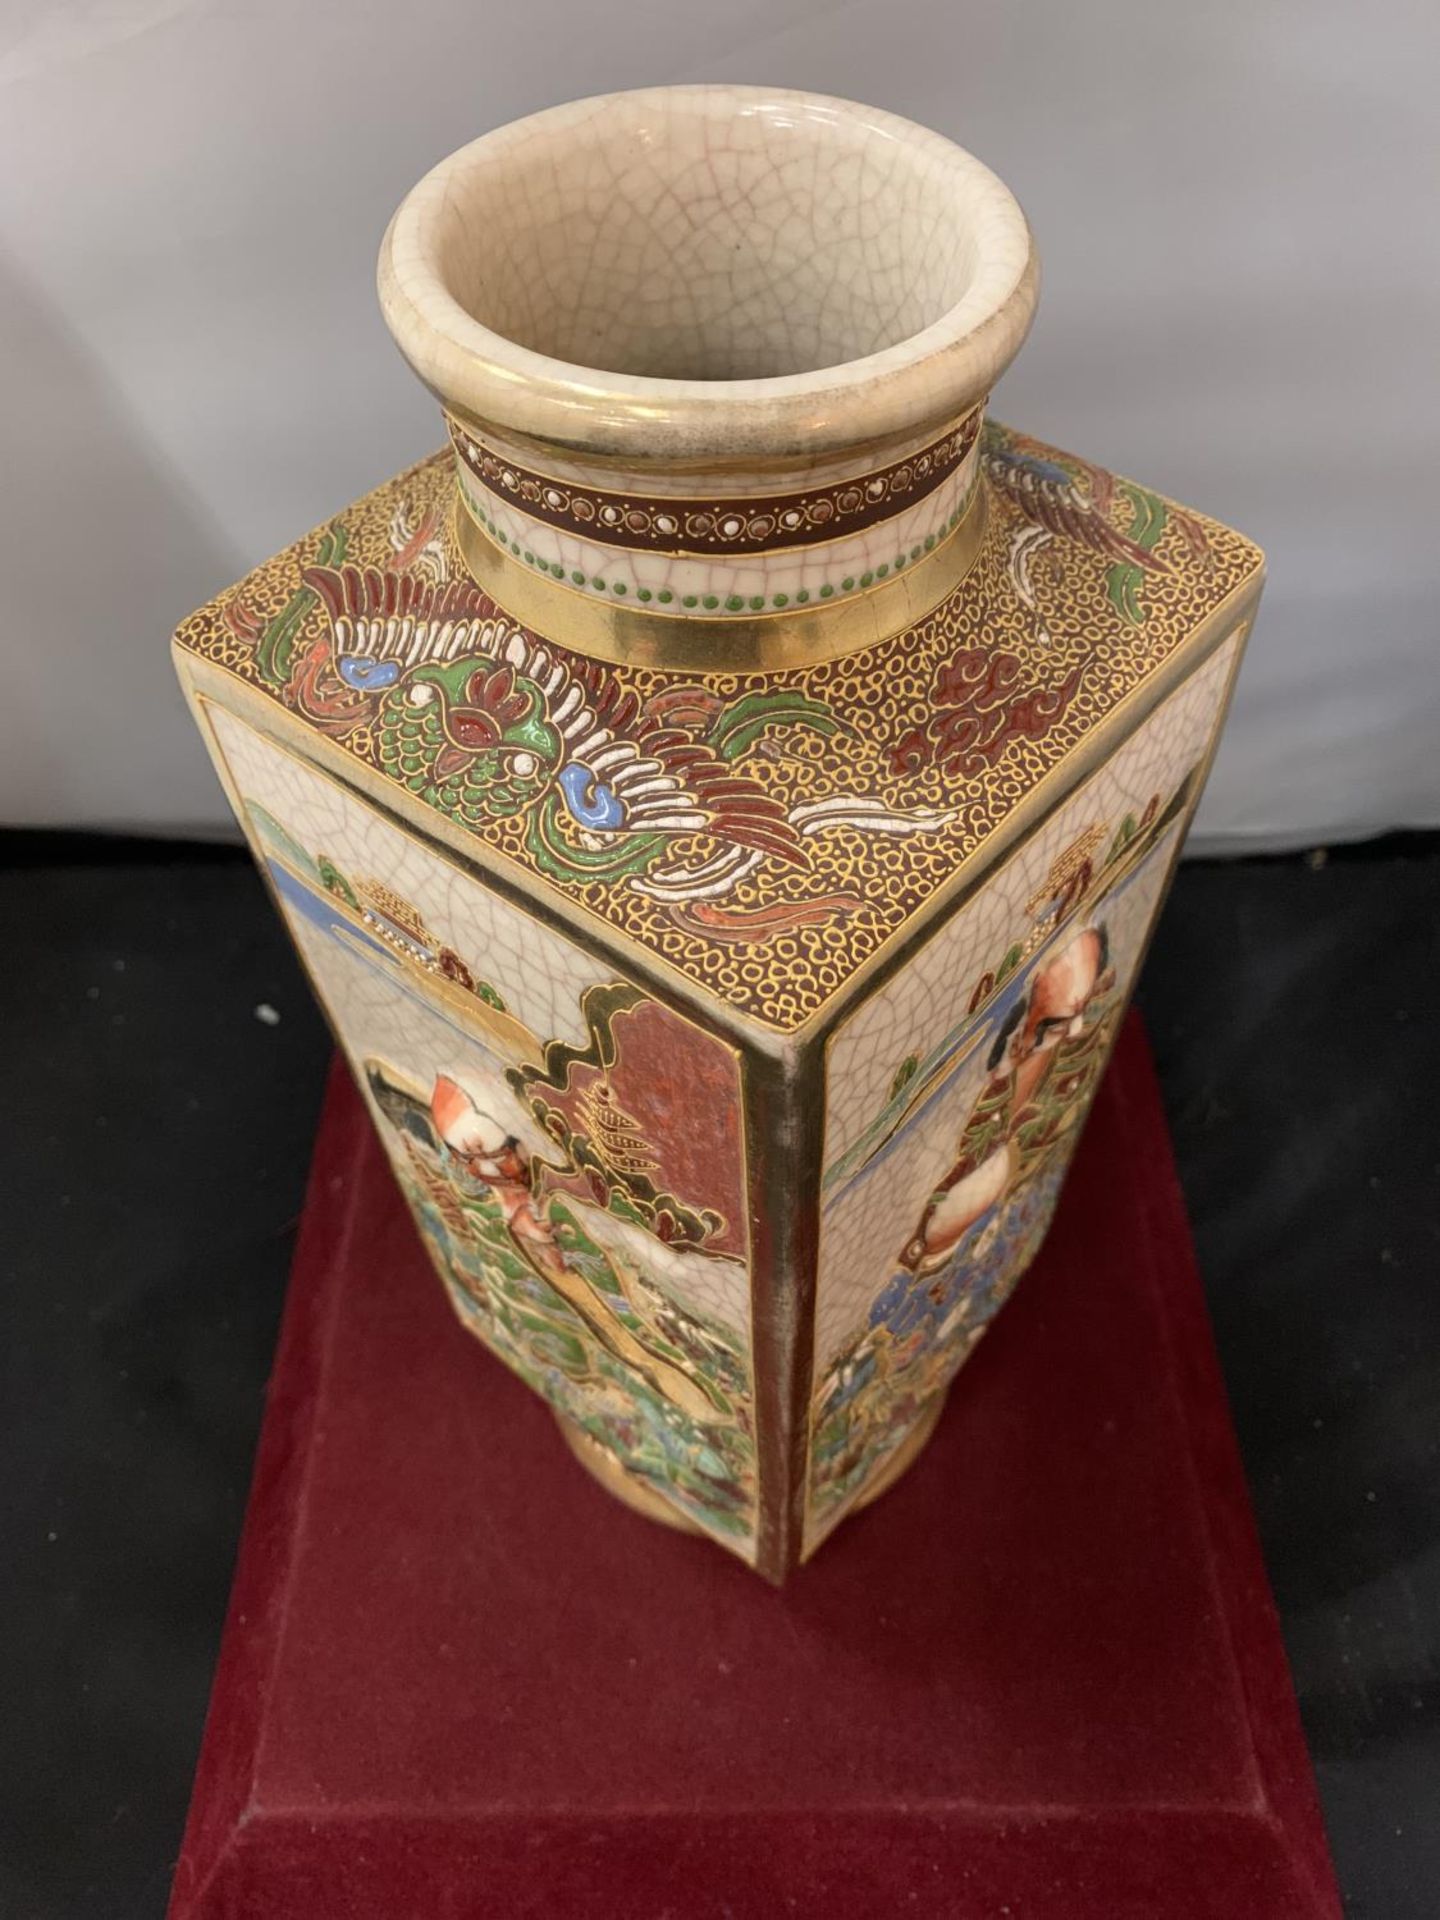 A DECORATIVE ORIENTAL VASE WITH GOLD DETAIL AND ORIENTAL MARK ON THE BASE H: 32 CM - Image 5 of 6